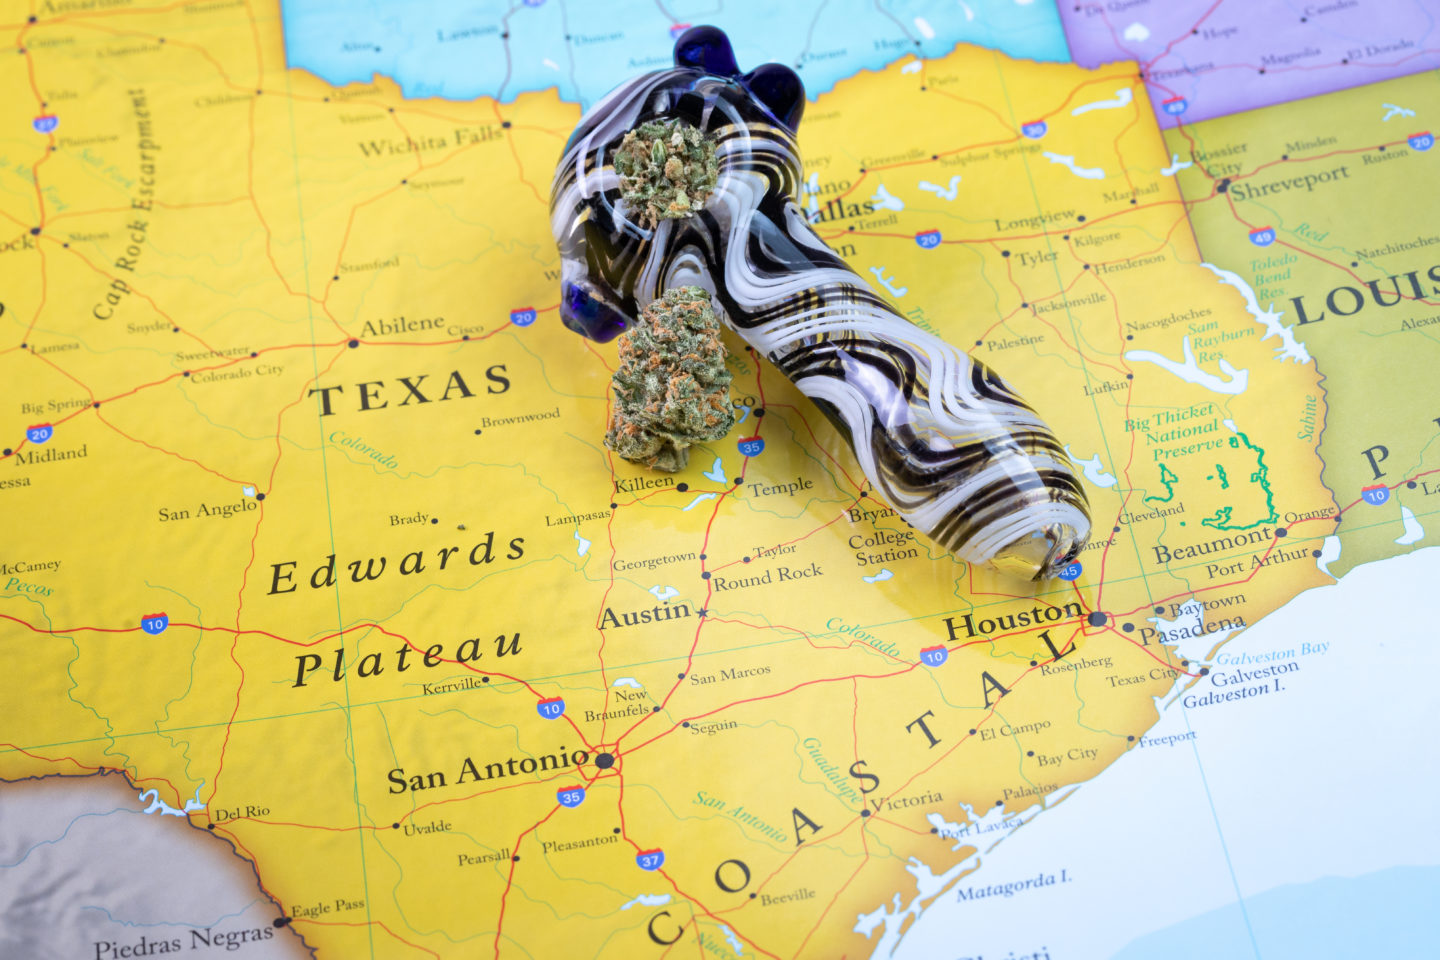 Texas Lawmaker Makes Push For Statewide Cannabis Legalization MJ